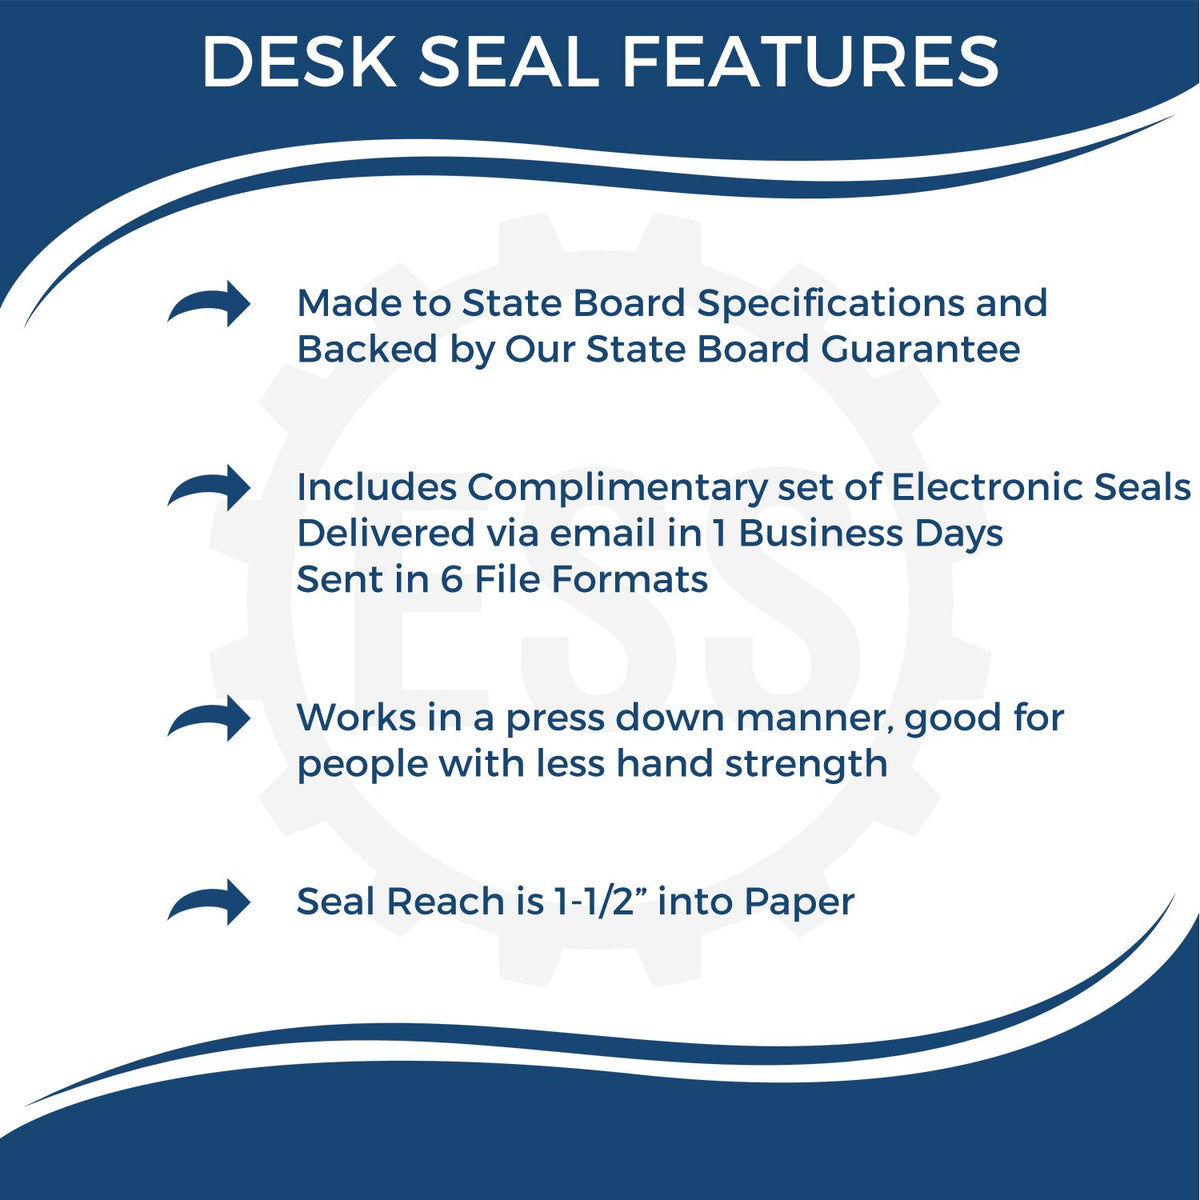 A picture of an infographic highlighting the selling points for the Alabama Desk Surveyor Seal Embosser